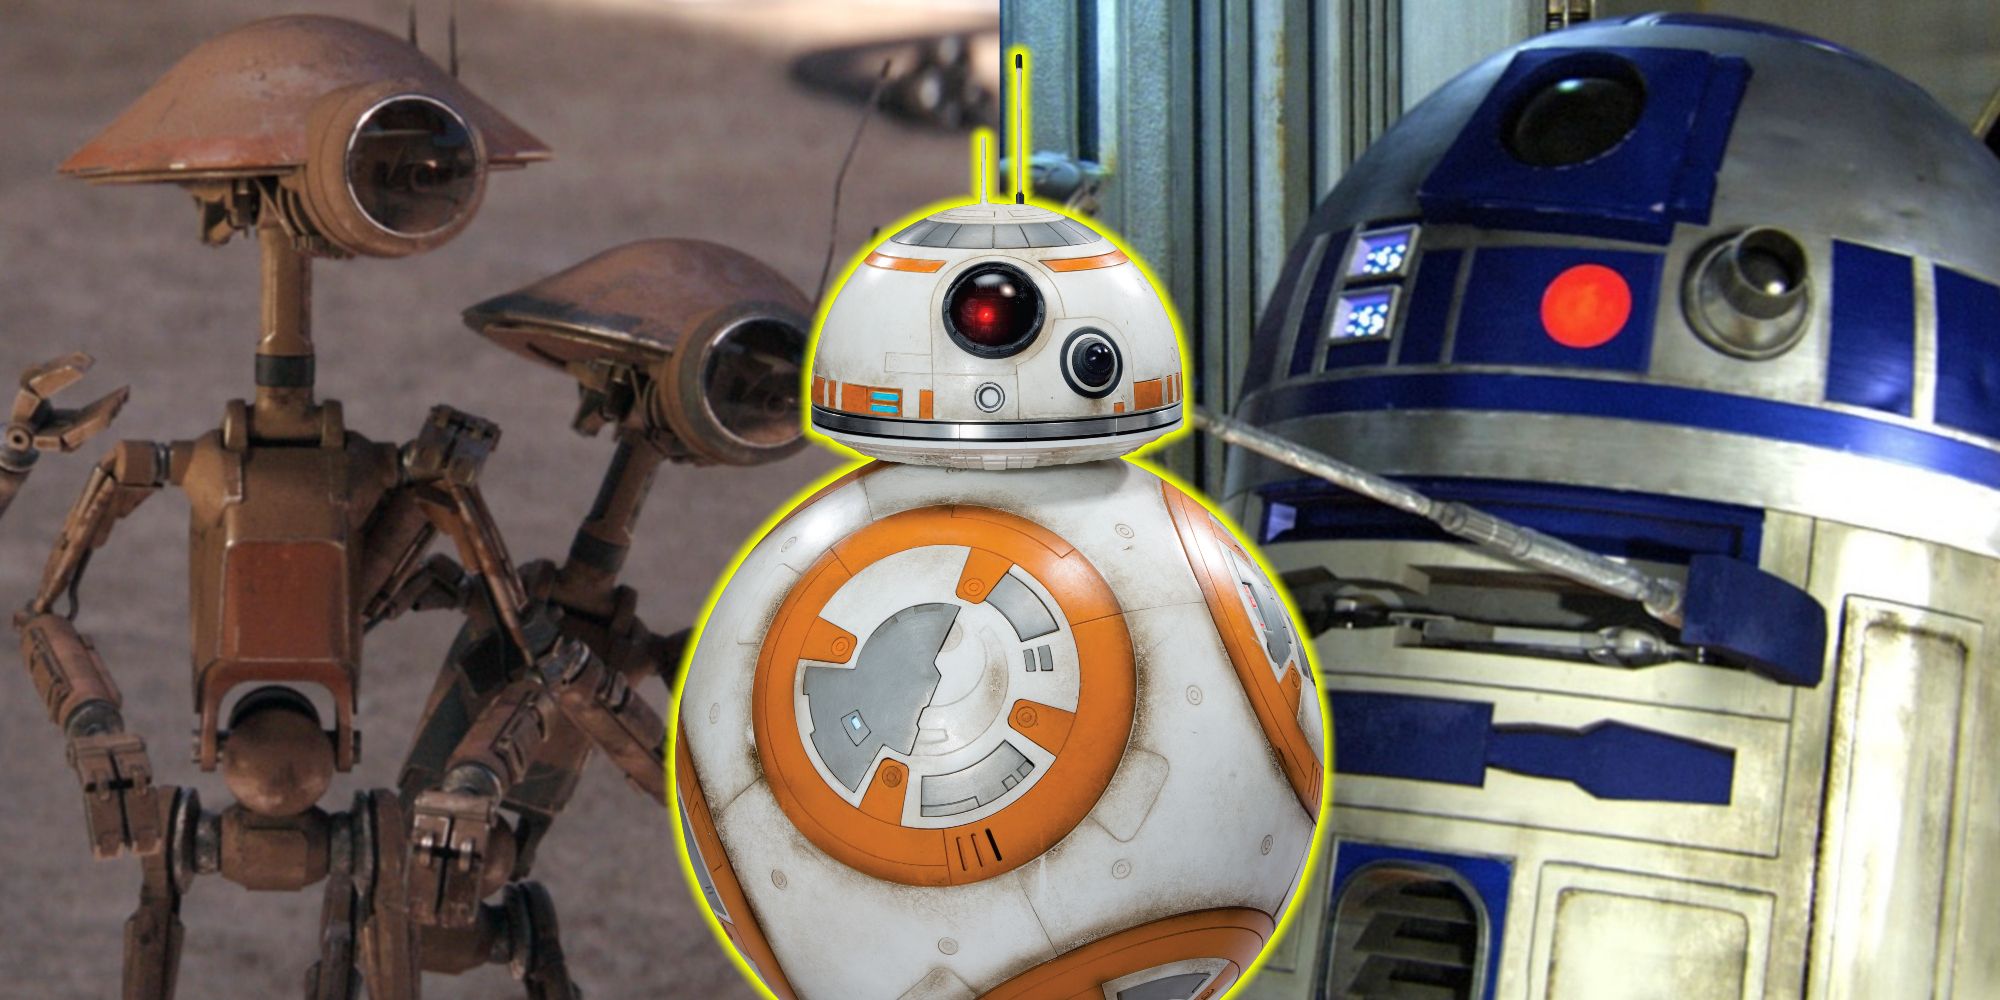 Split image of Pit Droids, BB-8, and R2-D2 in Star Wars